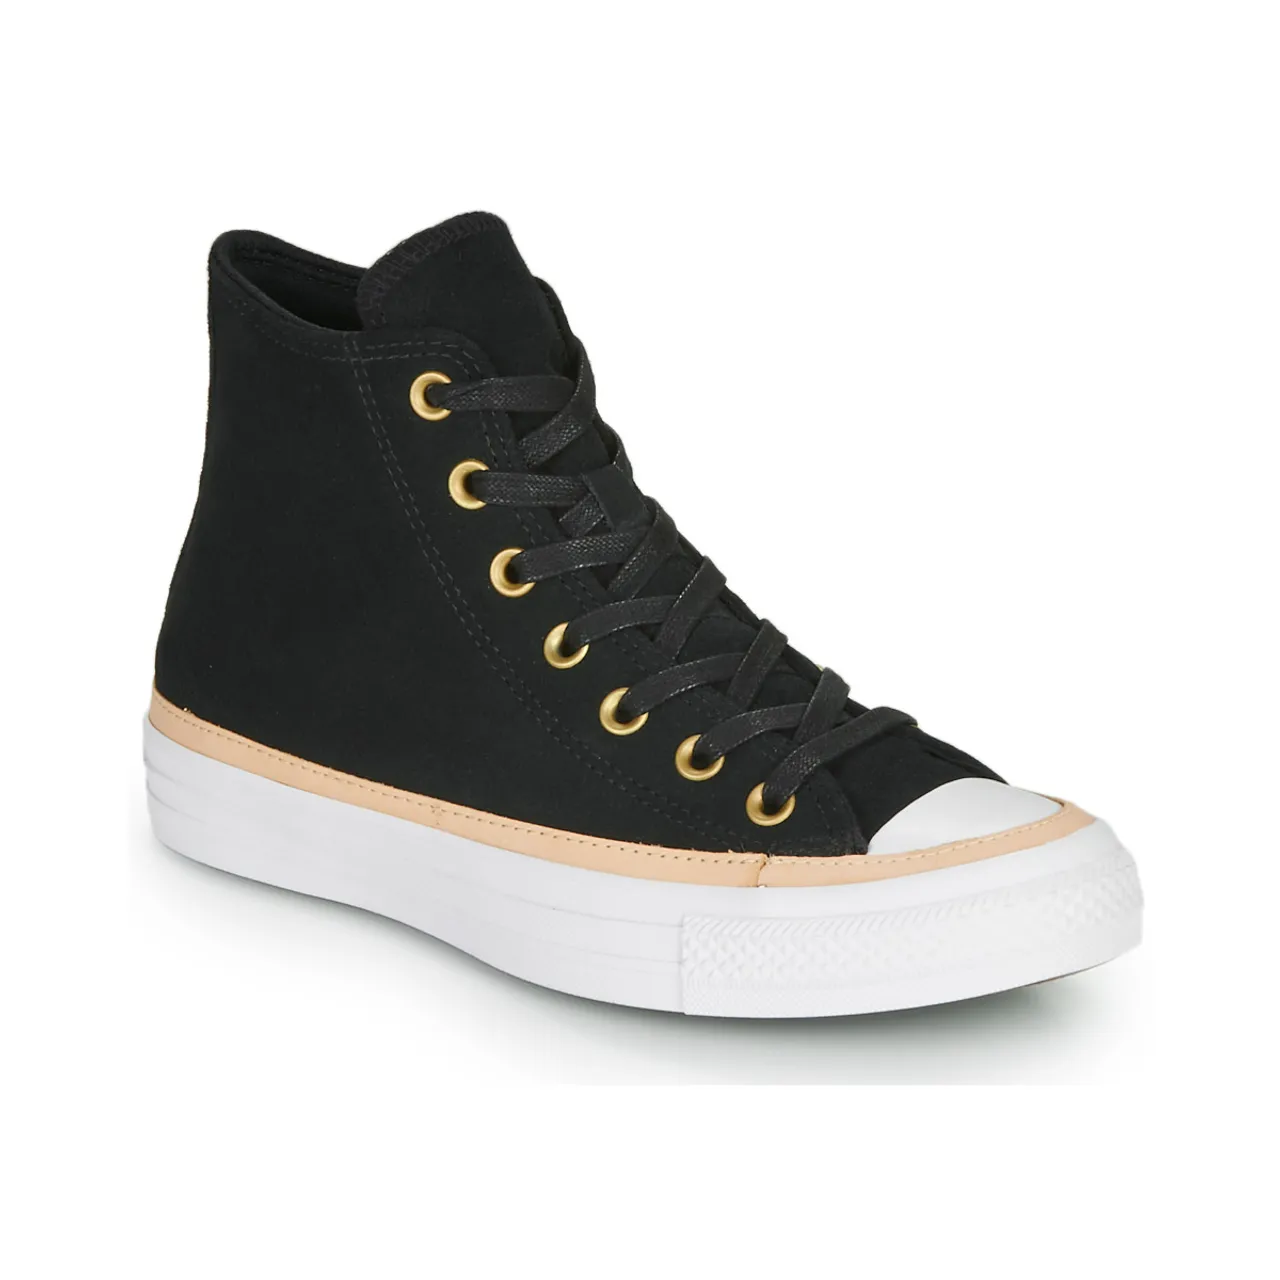 Converse  CHUCK TAYLOR ALL STAR VACHETTA LEATHER HI  women's Shoes (High-top Trainers) in Black